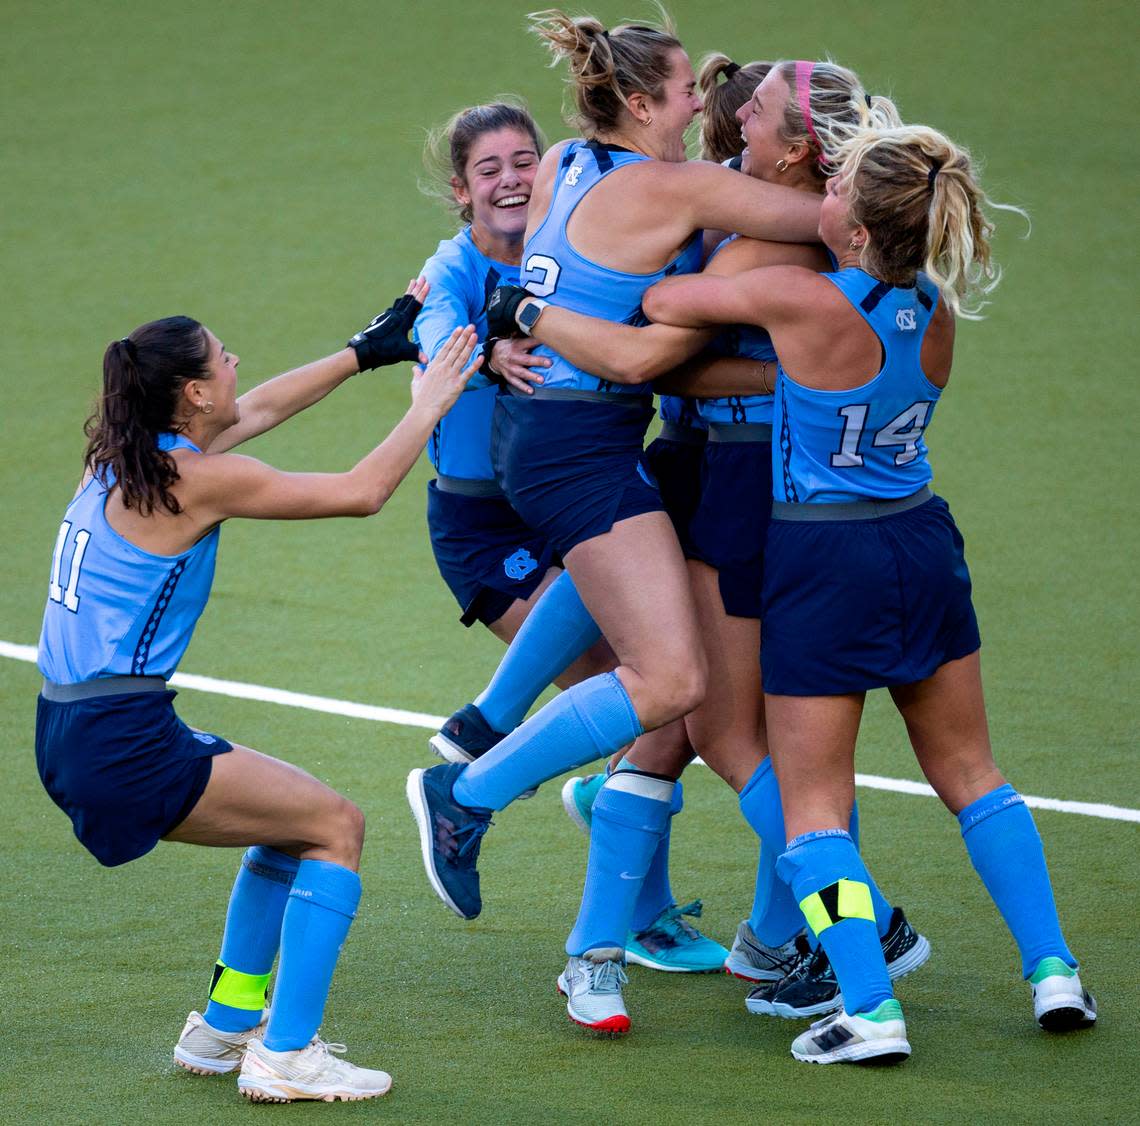 North Carolina’s Charly Bruner (2) embraces Ryleigh Heck (12) after she scored the game winning goal in a sudden death shootout on Northwestern goalie Annabel Skubisz to clinch the NCAA Division I Field Hockey Championship on Sunday, November 19, 2023 at Karen Shelton Stadium in Chapel Hill, N.C.